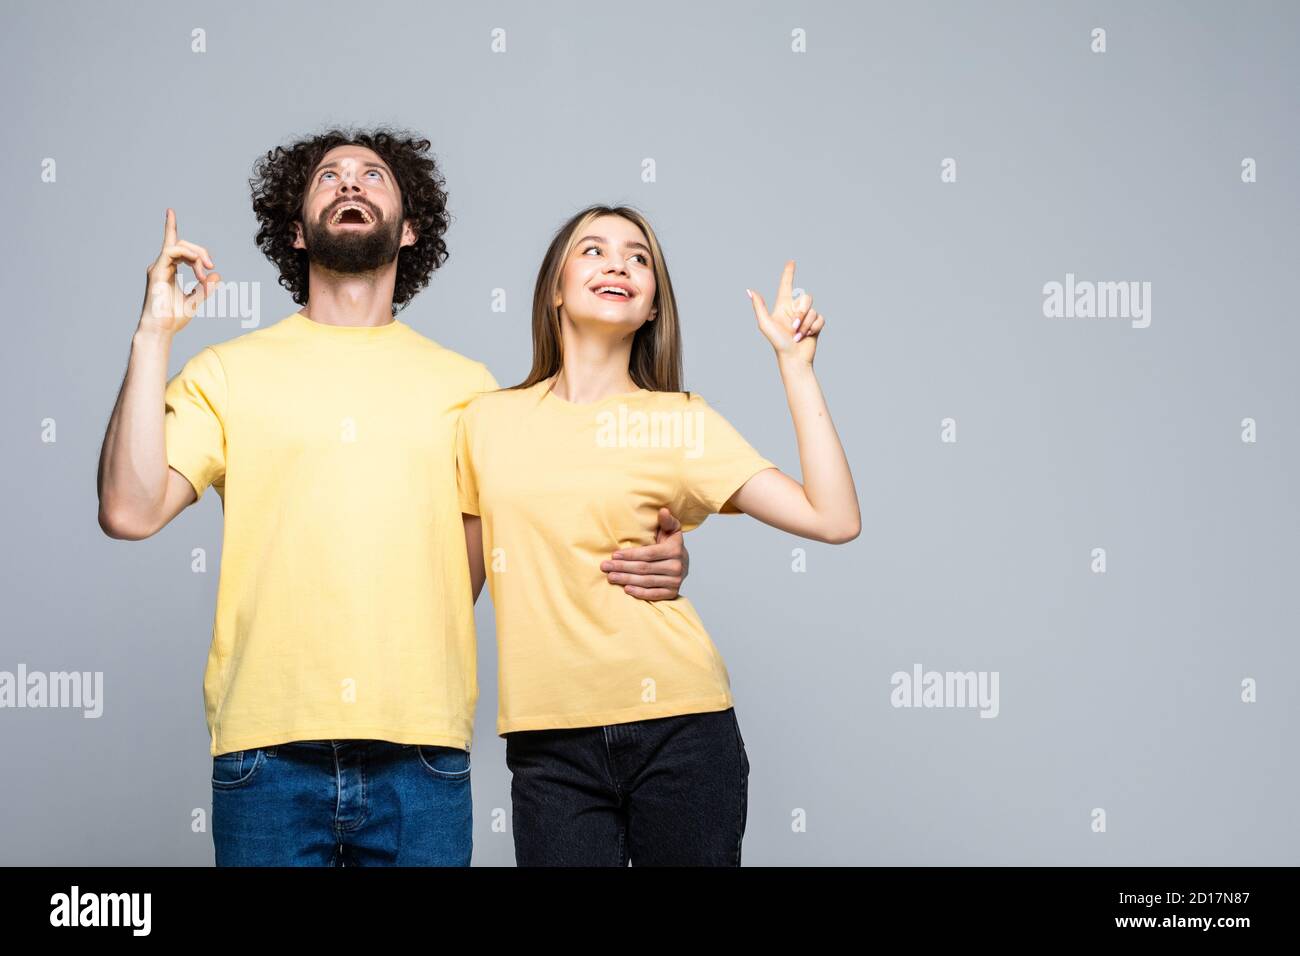 Excited happy young couple winners celebrate win motivated by triumph rejoice victory success together isolated on white grey background Stock Photo